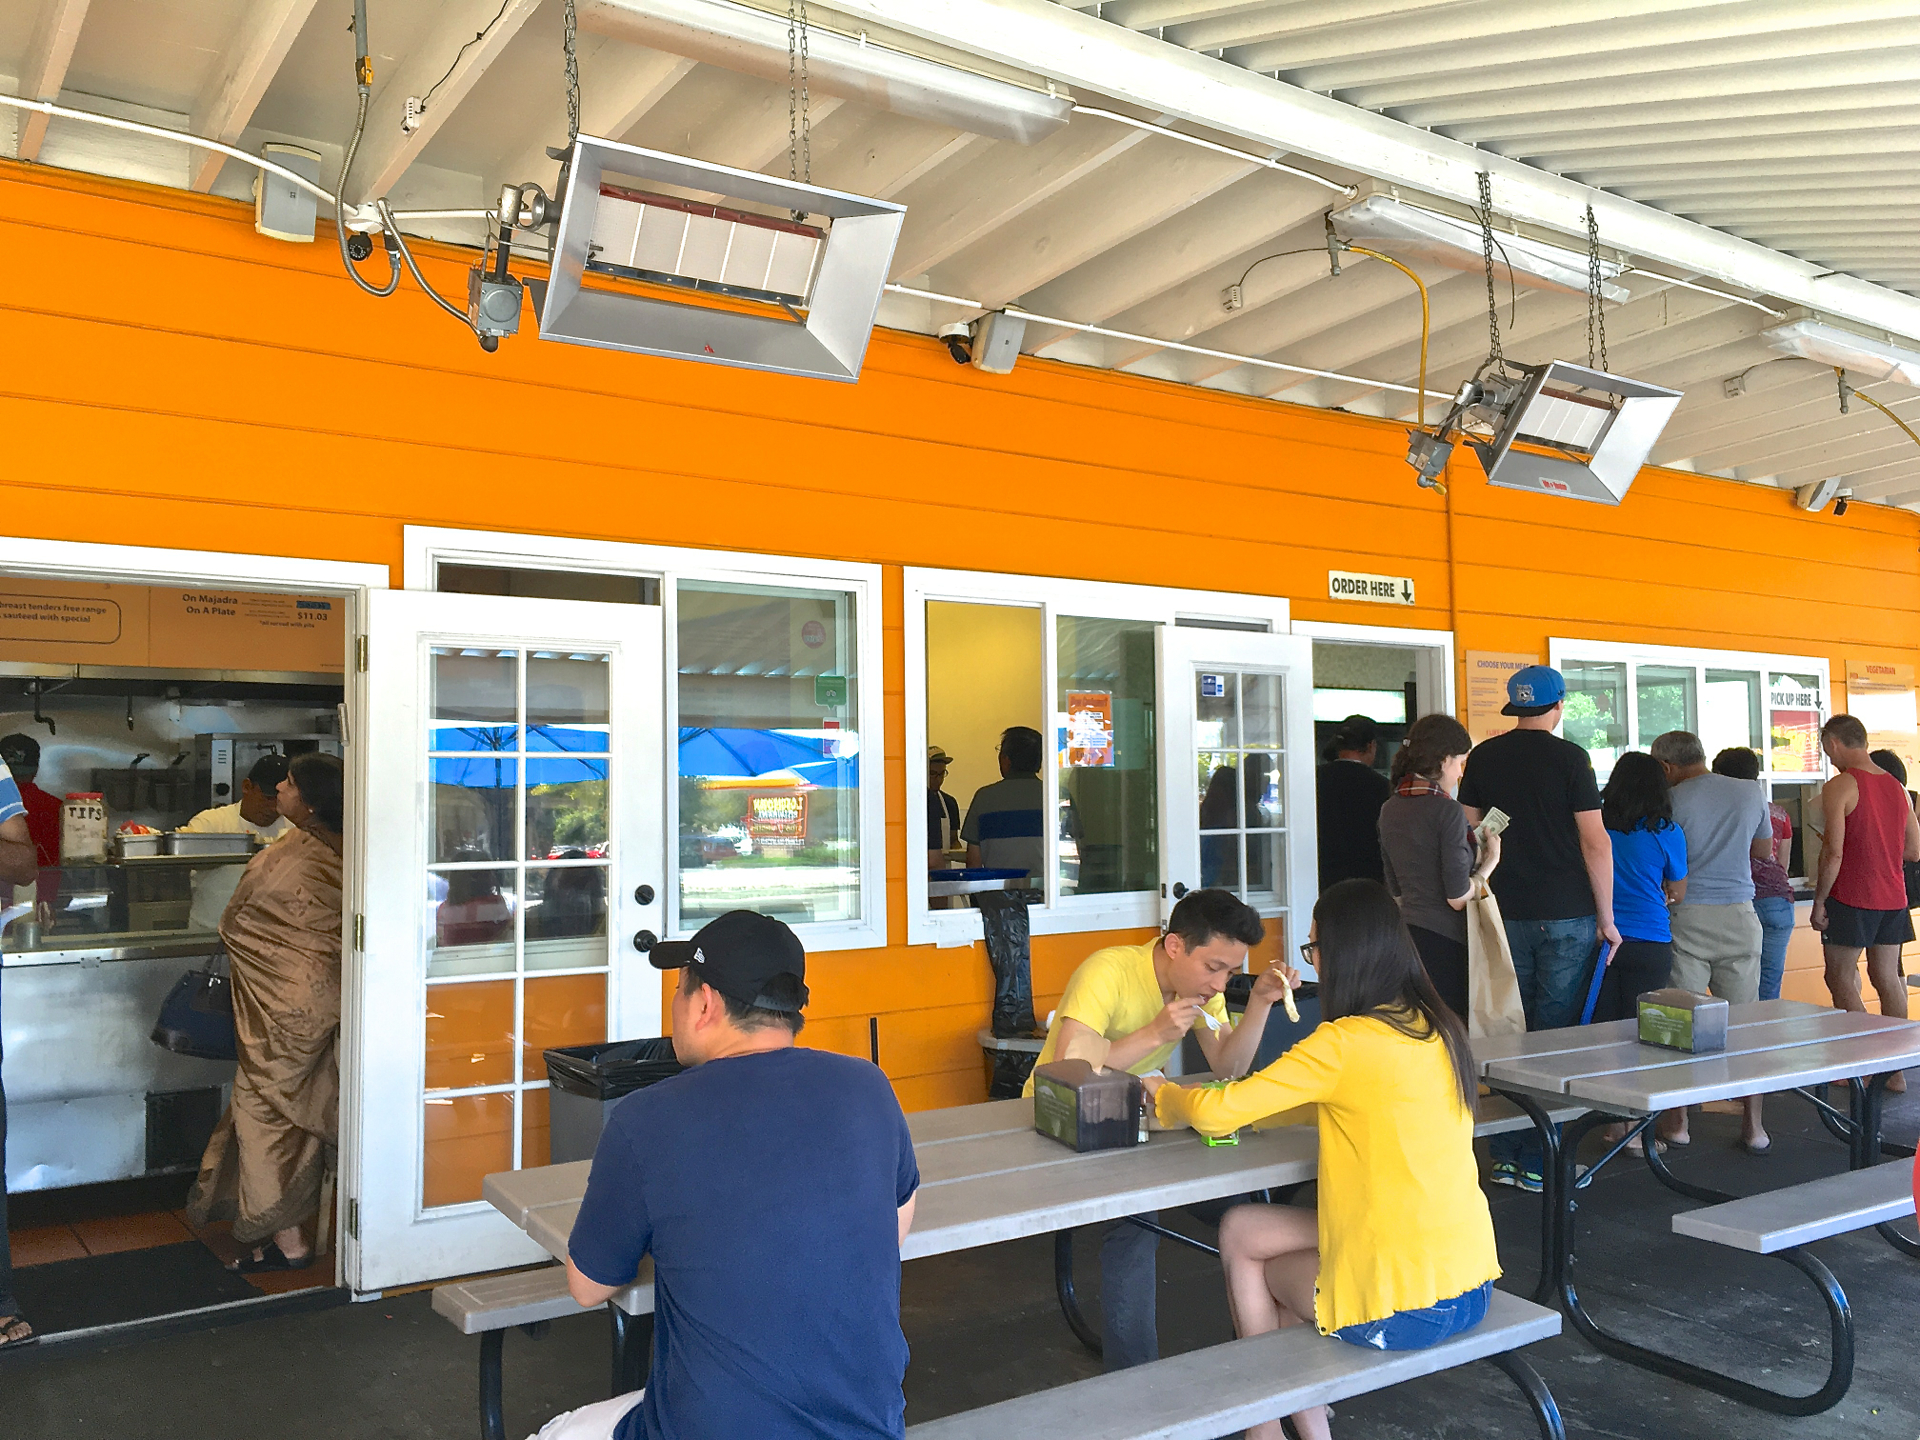 Customers wait on line to pickup their order from the kitchen at Falafel Stop in Sunnyvale.